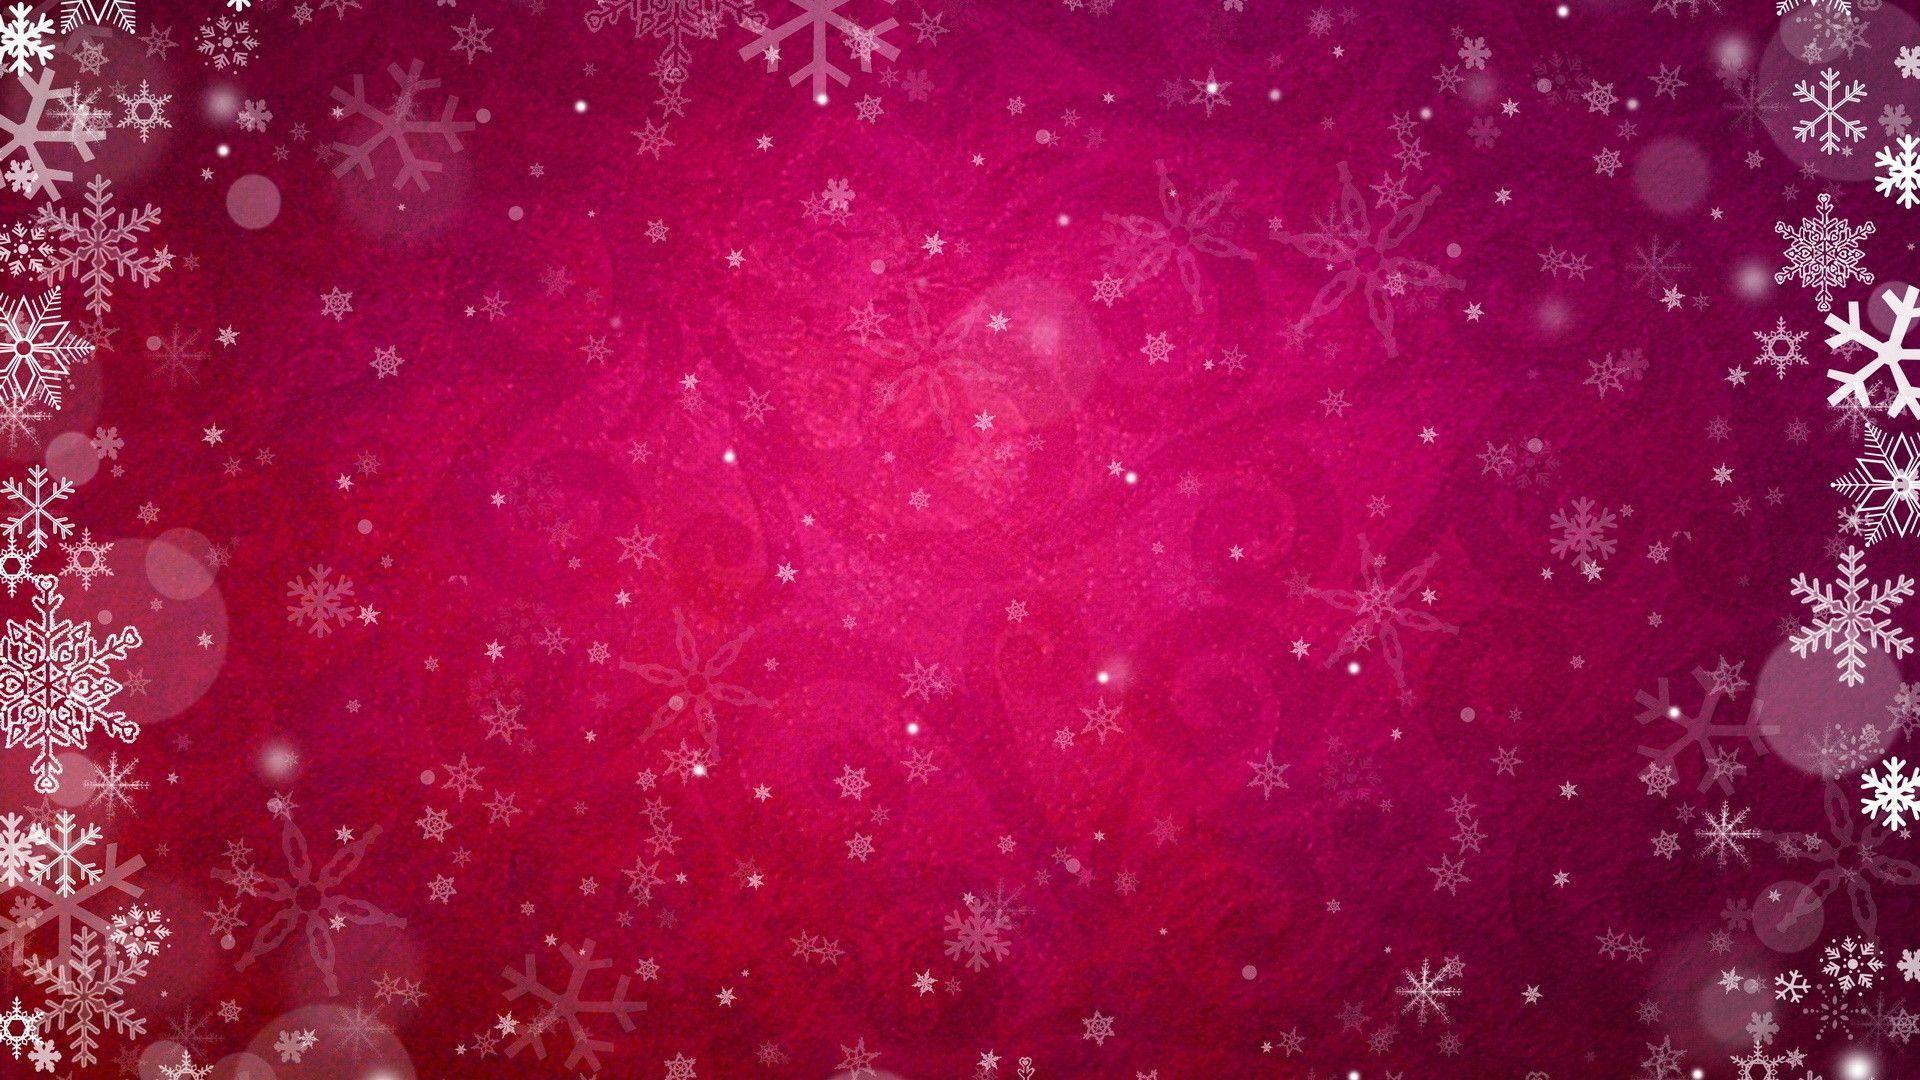 Snowflakes Background Snow Wallpaper 1920x1080 px Free Download